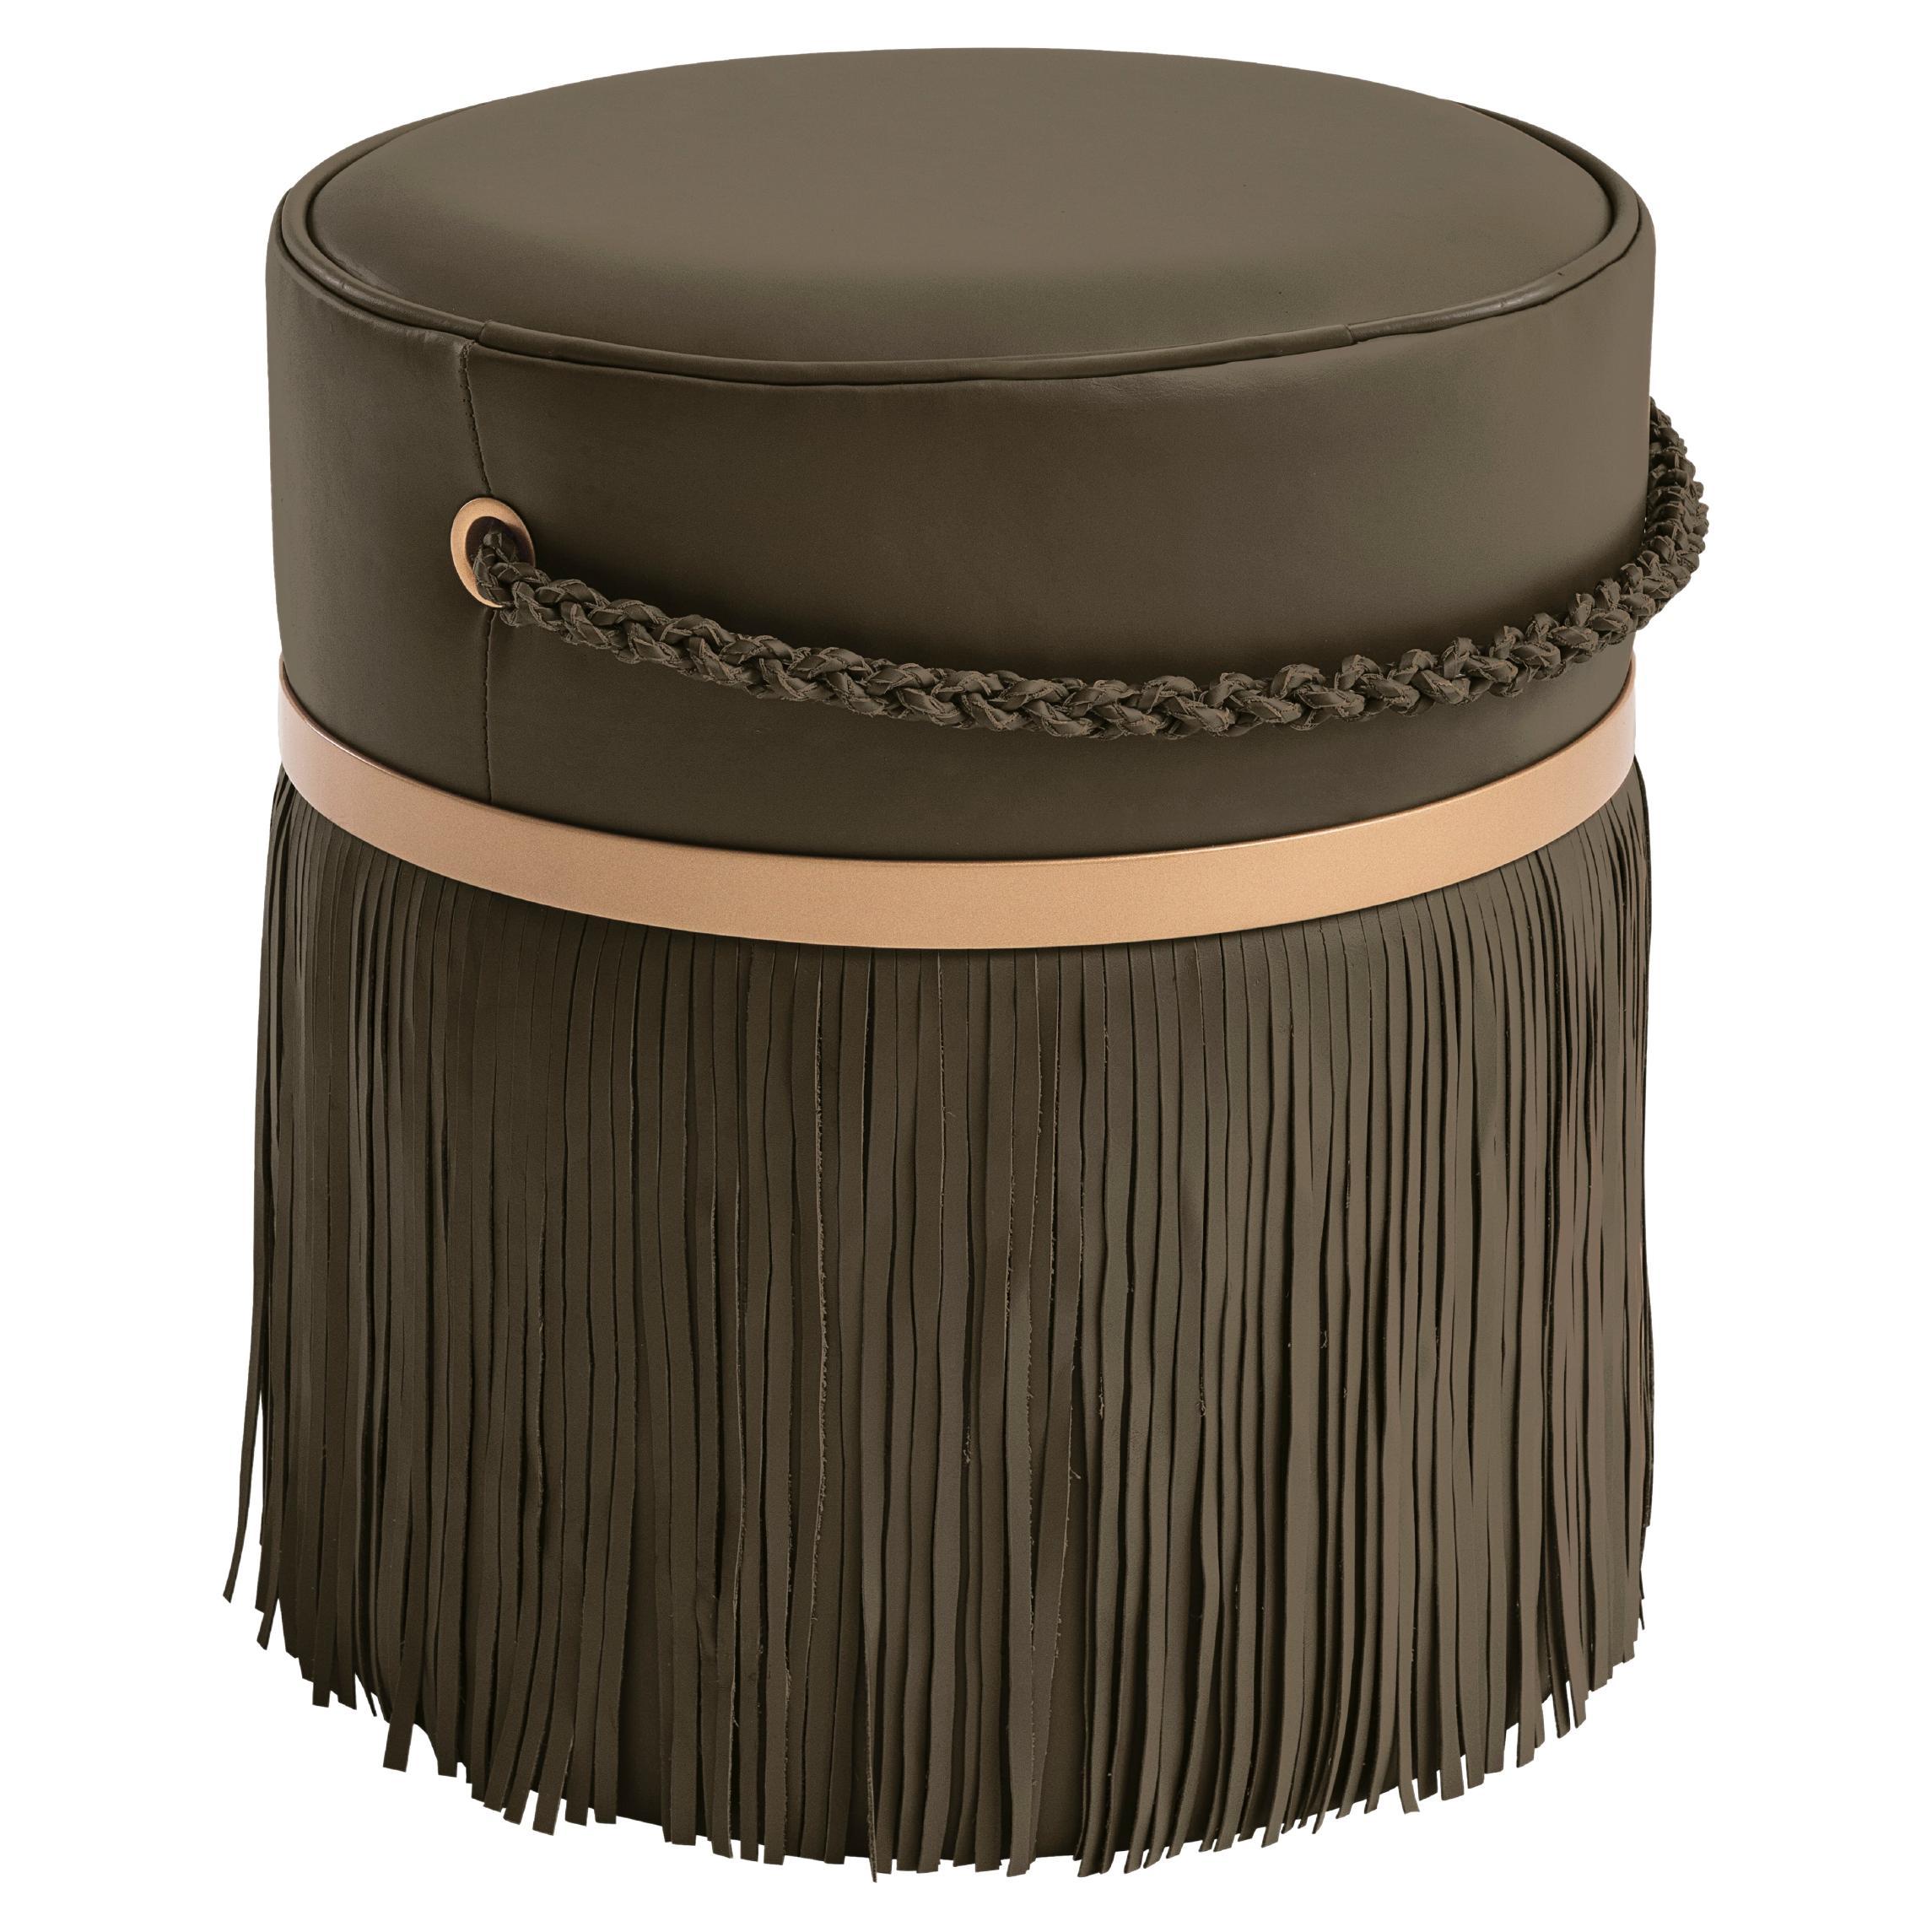 The Revoar ottoman is produced in natural genuine leather in the colors options: pearl, brown, black and light pink.
The Revoar ottoman has fringes and chain handles made with leather threads braided by hand by our artisans. 
It is finished with a